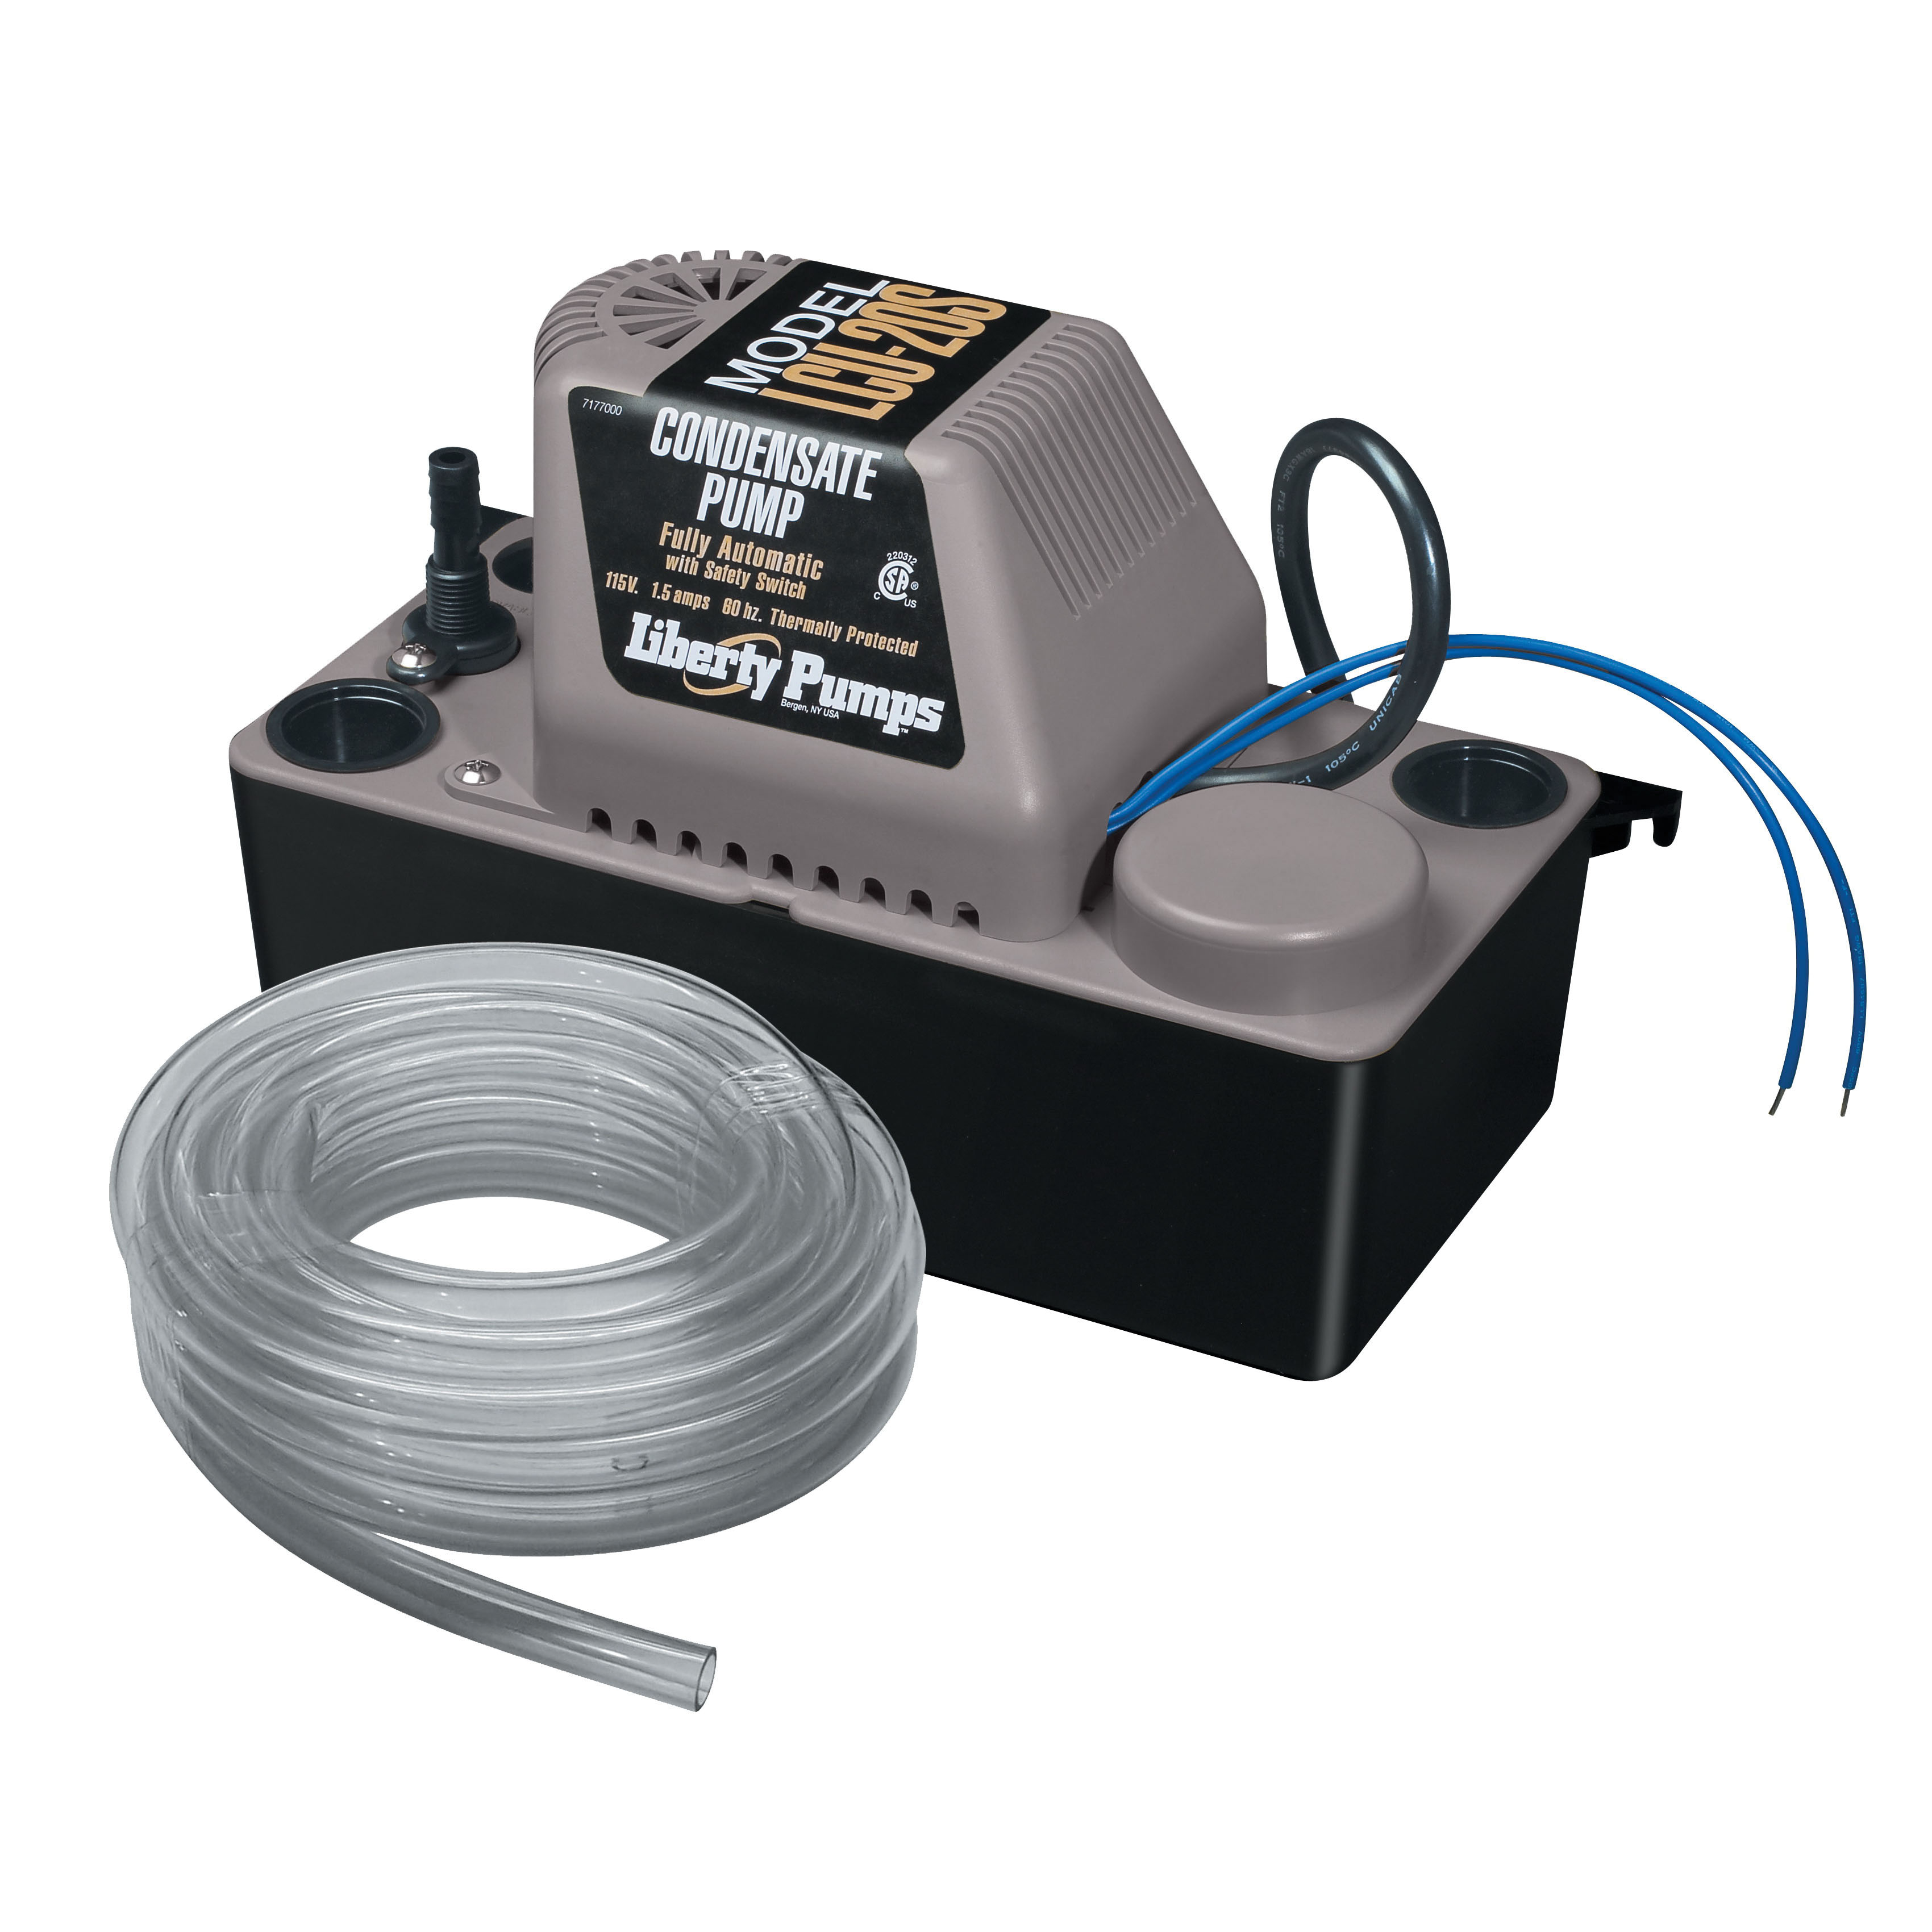 Liberty Pumps® LCU-20ST Condensate pump With Safety Switch, 110 gpm Flow Rate, 3/8 in OD Outlet, 20 ft Shutoff Head, 1/30 hp Power Rating